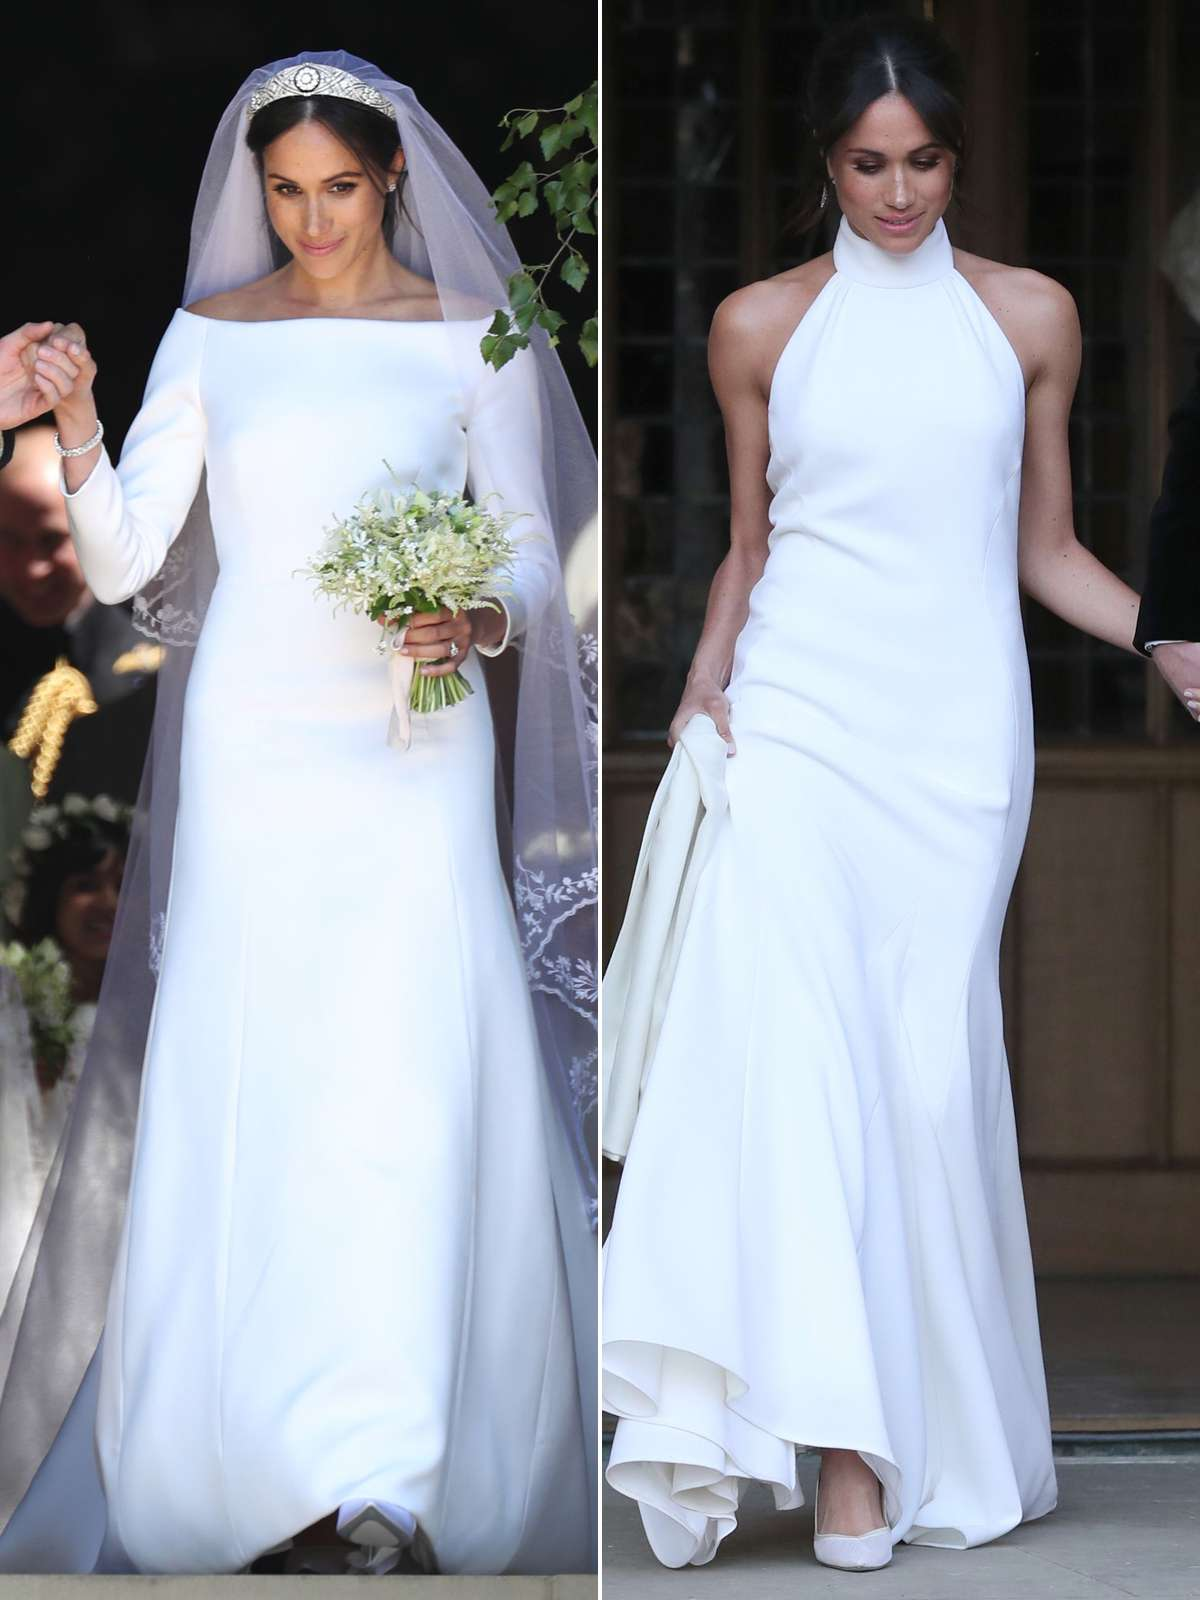 A comparison of Meghan Markle's initial and evening wedding gowns.